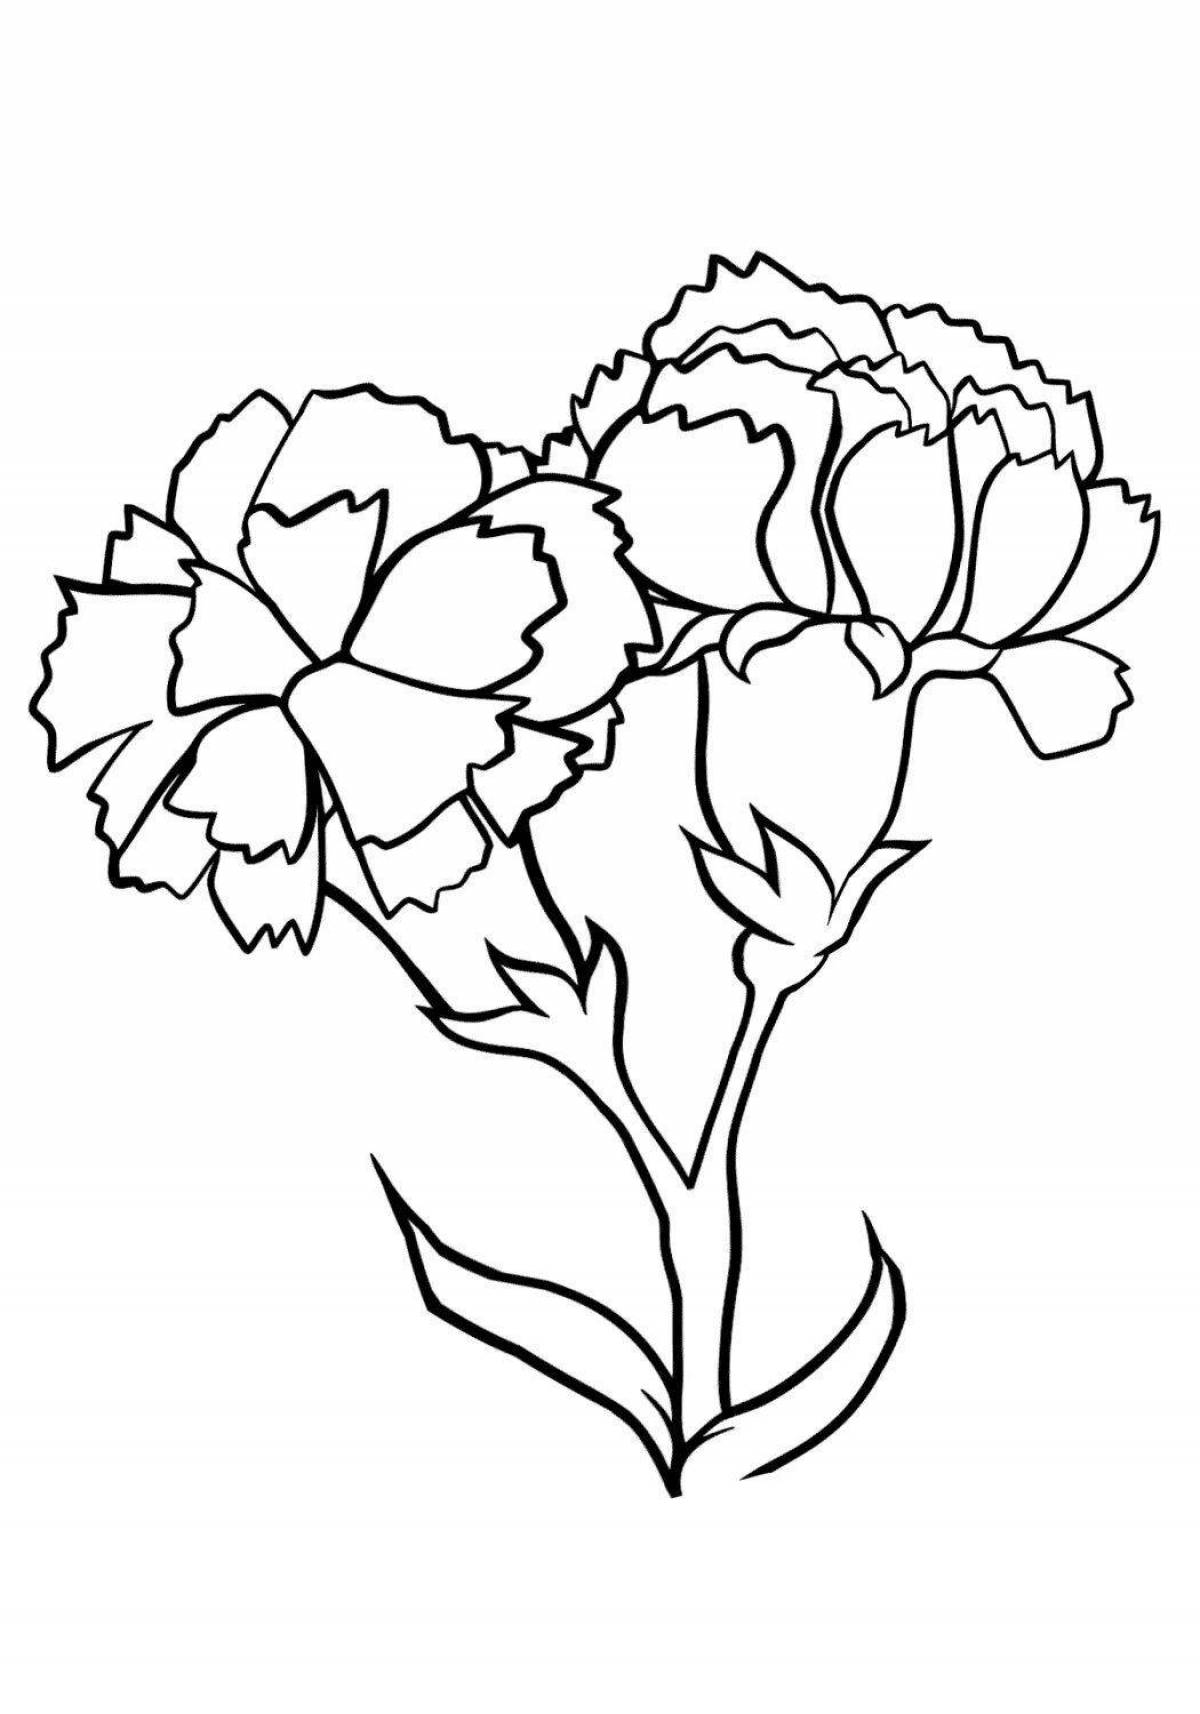 Glowing carnations coloring book